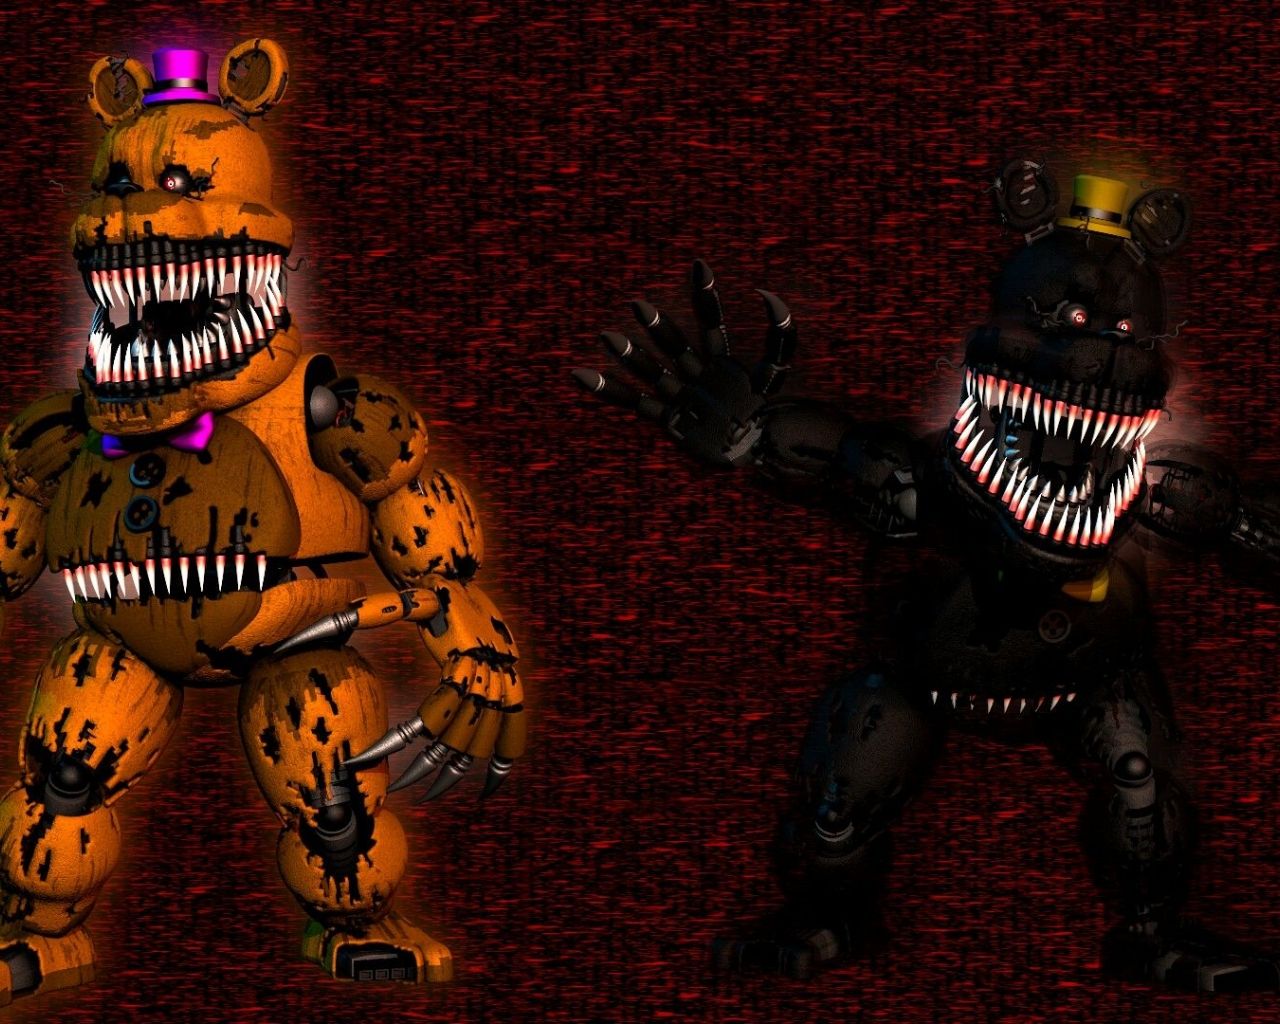 Free download FNAF 4 wallpaper extra Nightmare Fredbear and Nightmare on [1920x1080] for your Desktop, Mobile & Tablet. Explore Nightmare Fredbear Wallpaper. Nightmare Fredbear Wallpaper, Nightmare Wallpaper, Nightmare Freddy Wallpaper